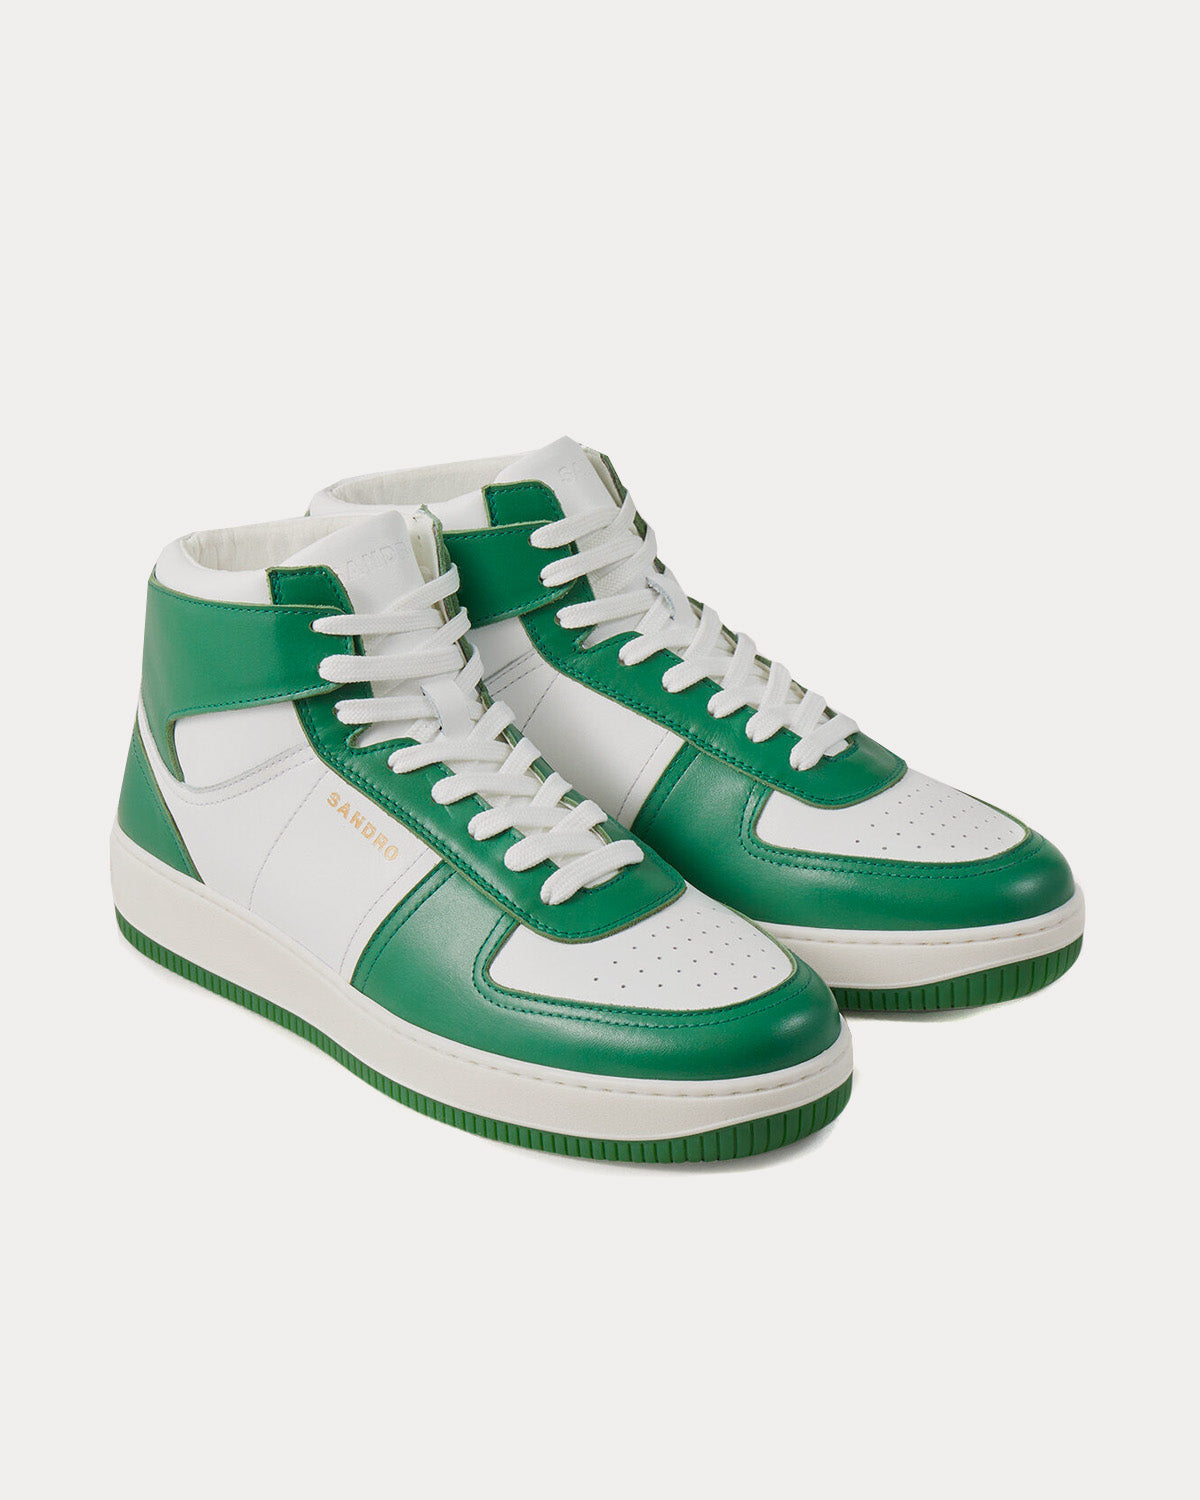 Sandro - Leather Green / White High Top Sneakers